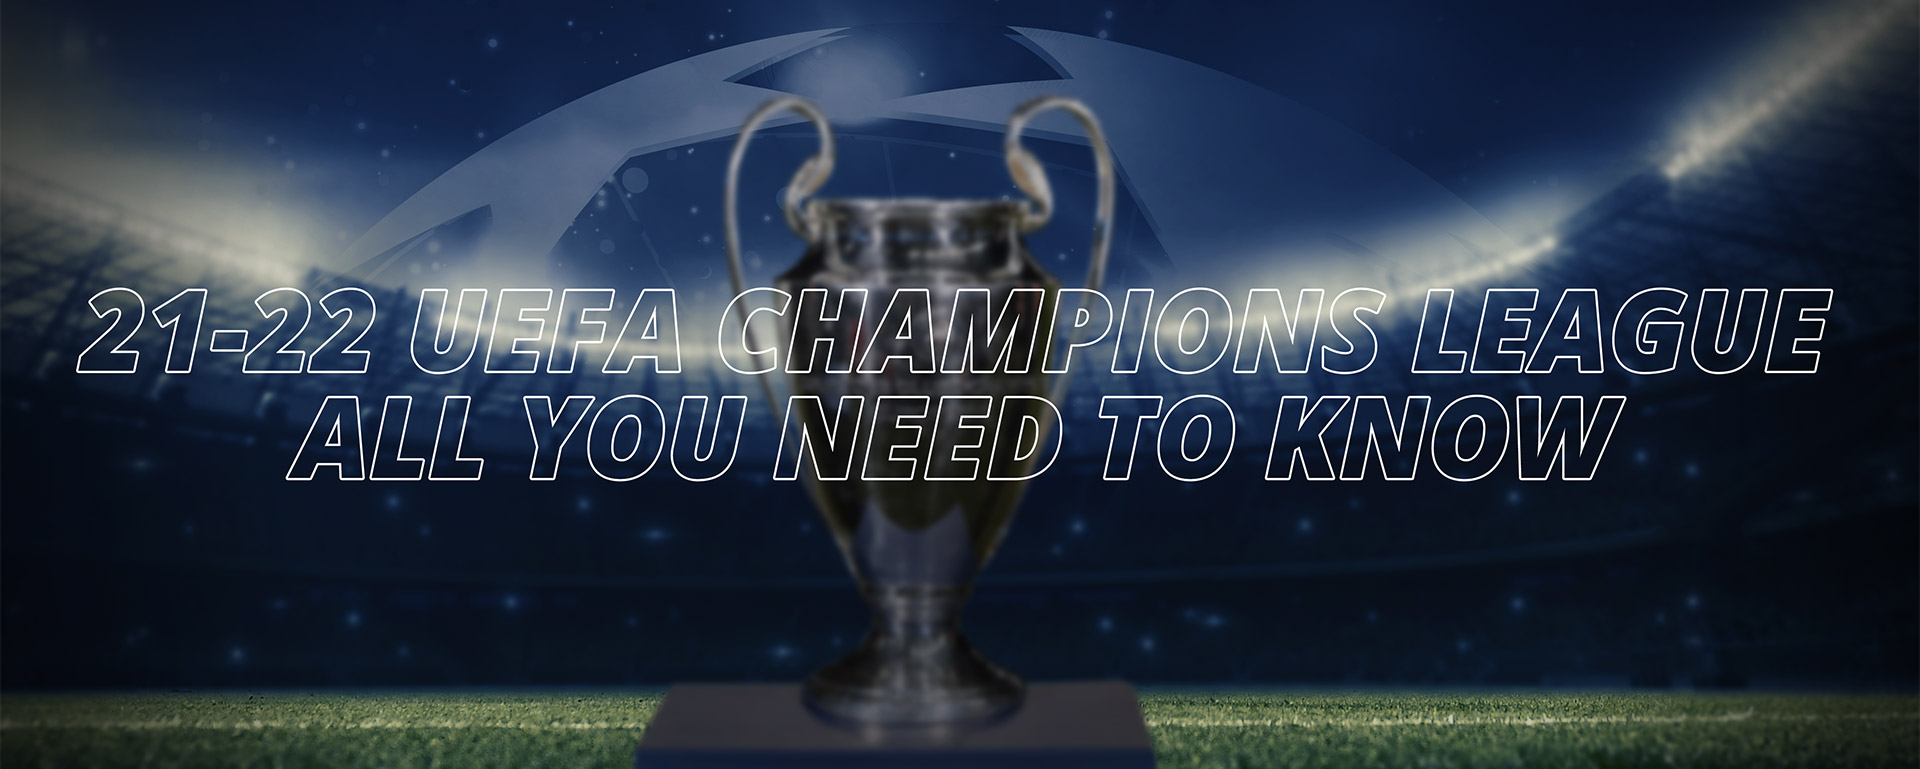 UEFA CHAMPIONS LEAGUE: ALL YOU NEED TO KNOW